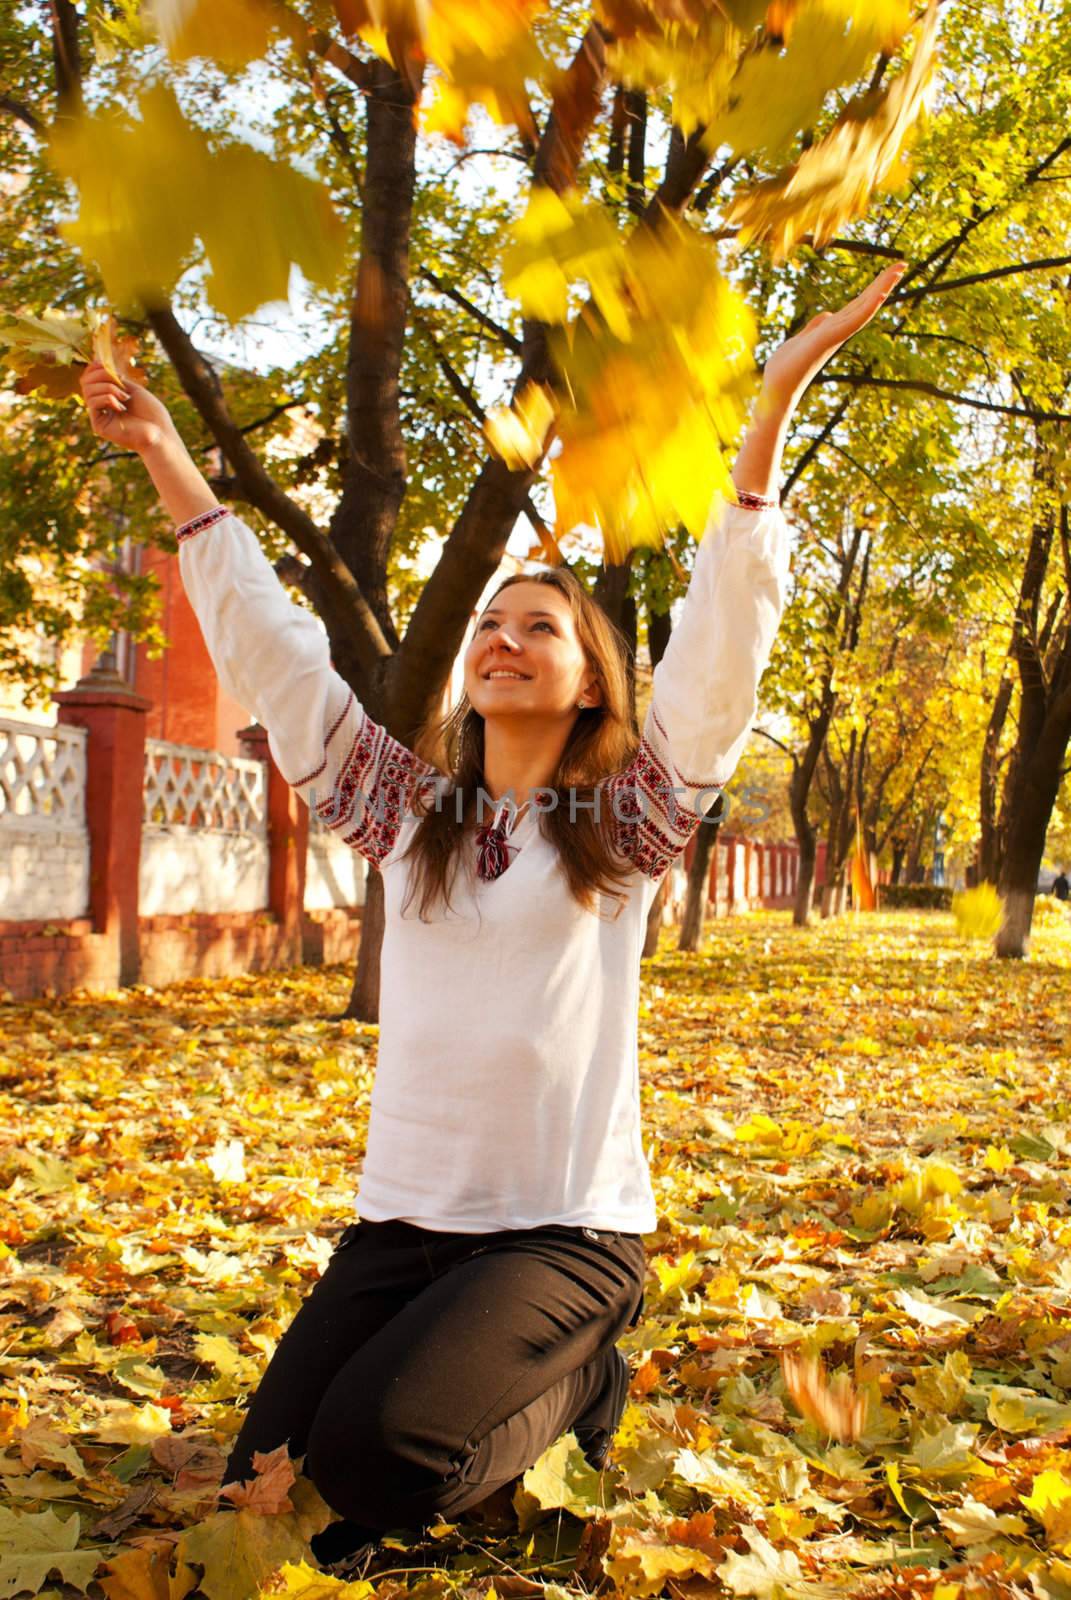 Young lady playing with leaves in a park at fall time